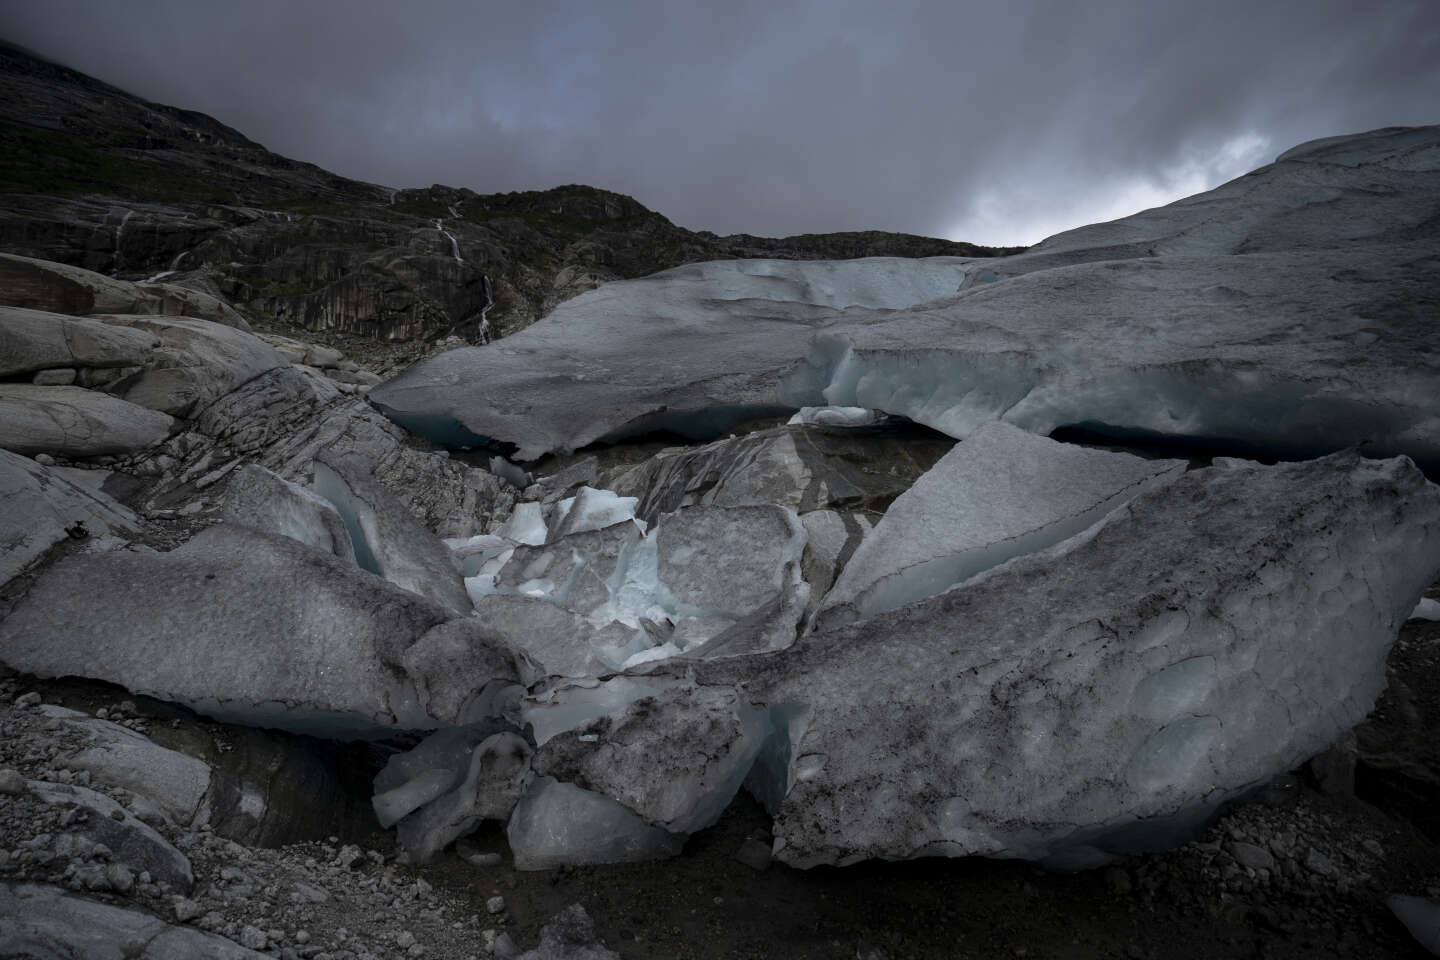 At least half of the world’s glaciers have fallen victim to climate change